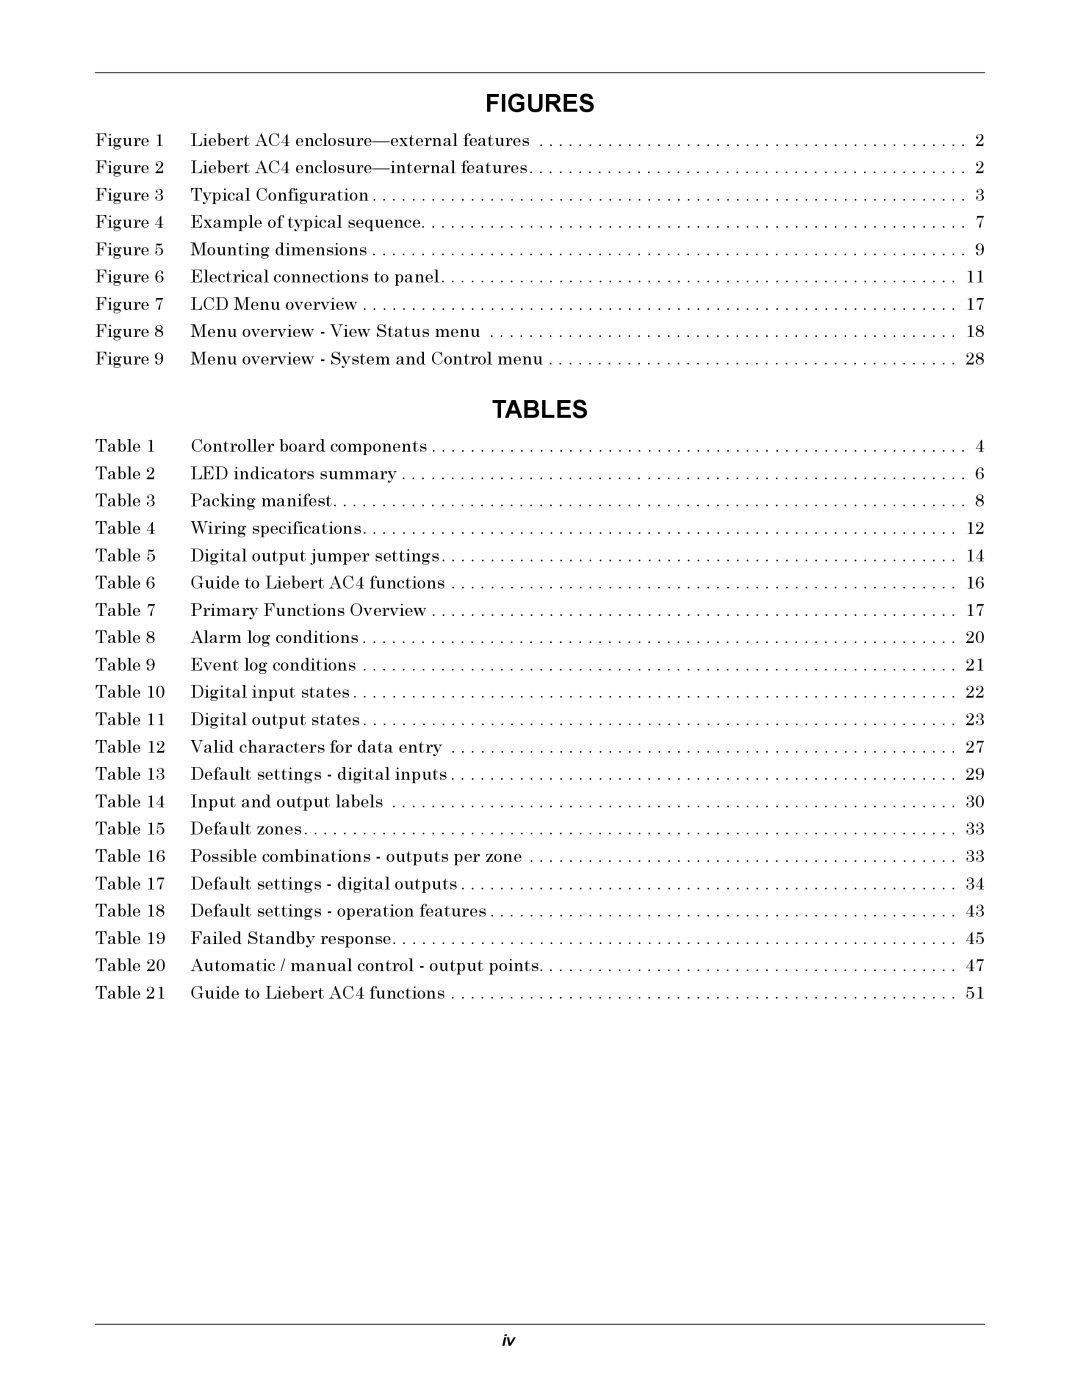 Emerson AC4 user manual Figures, Tables 